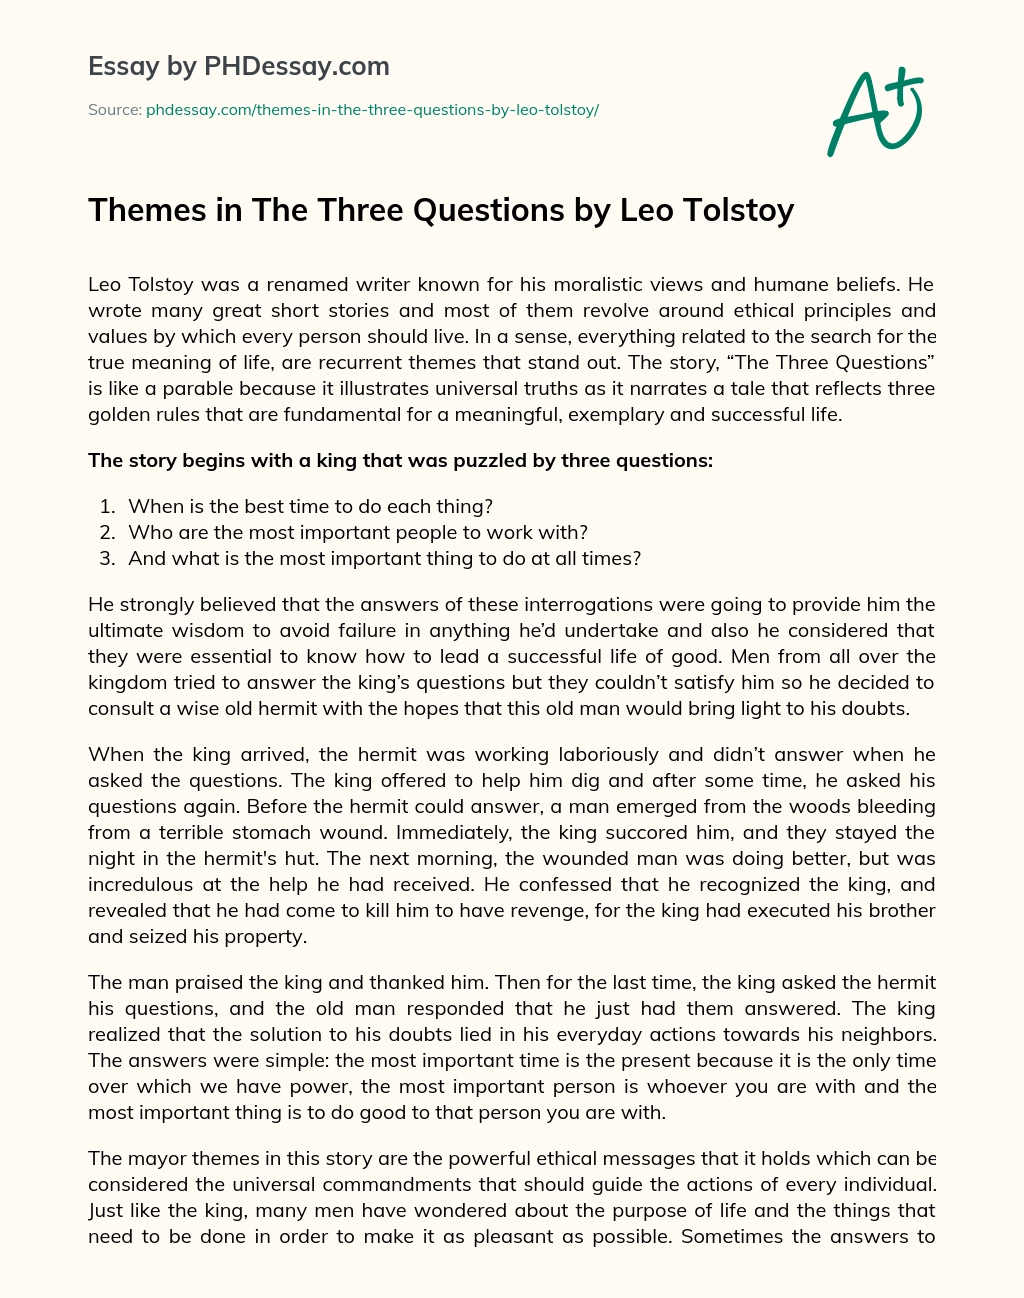 Themes in The Three Questions by Leo Tolstoy essay